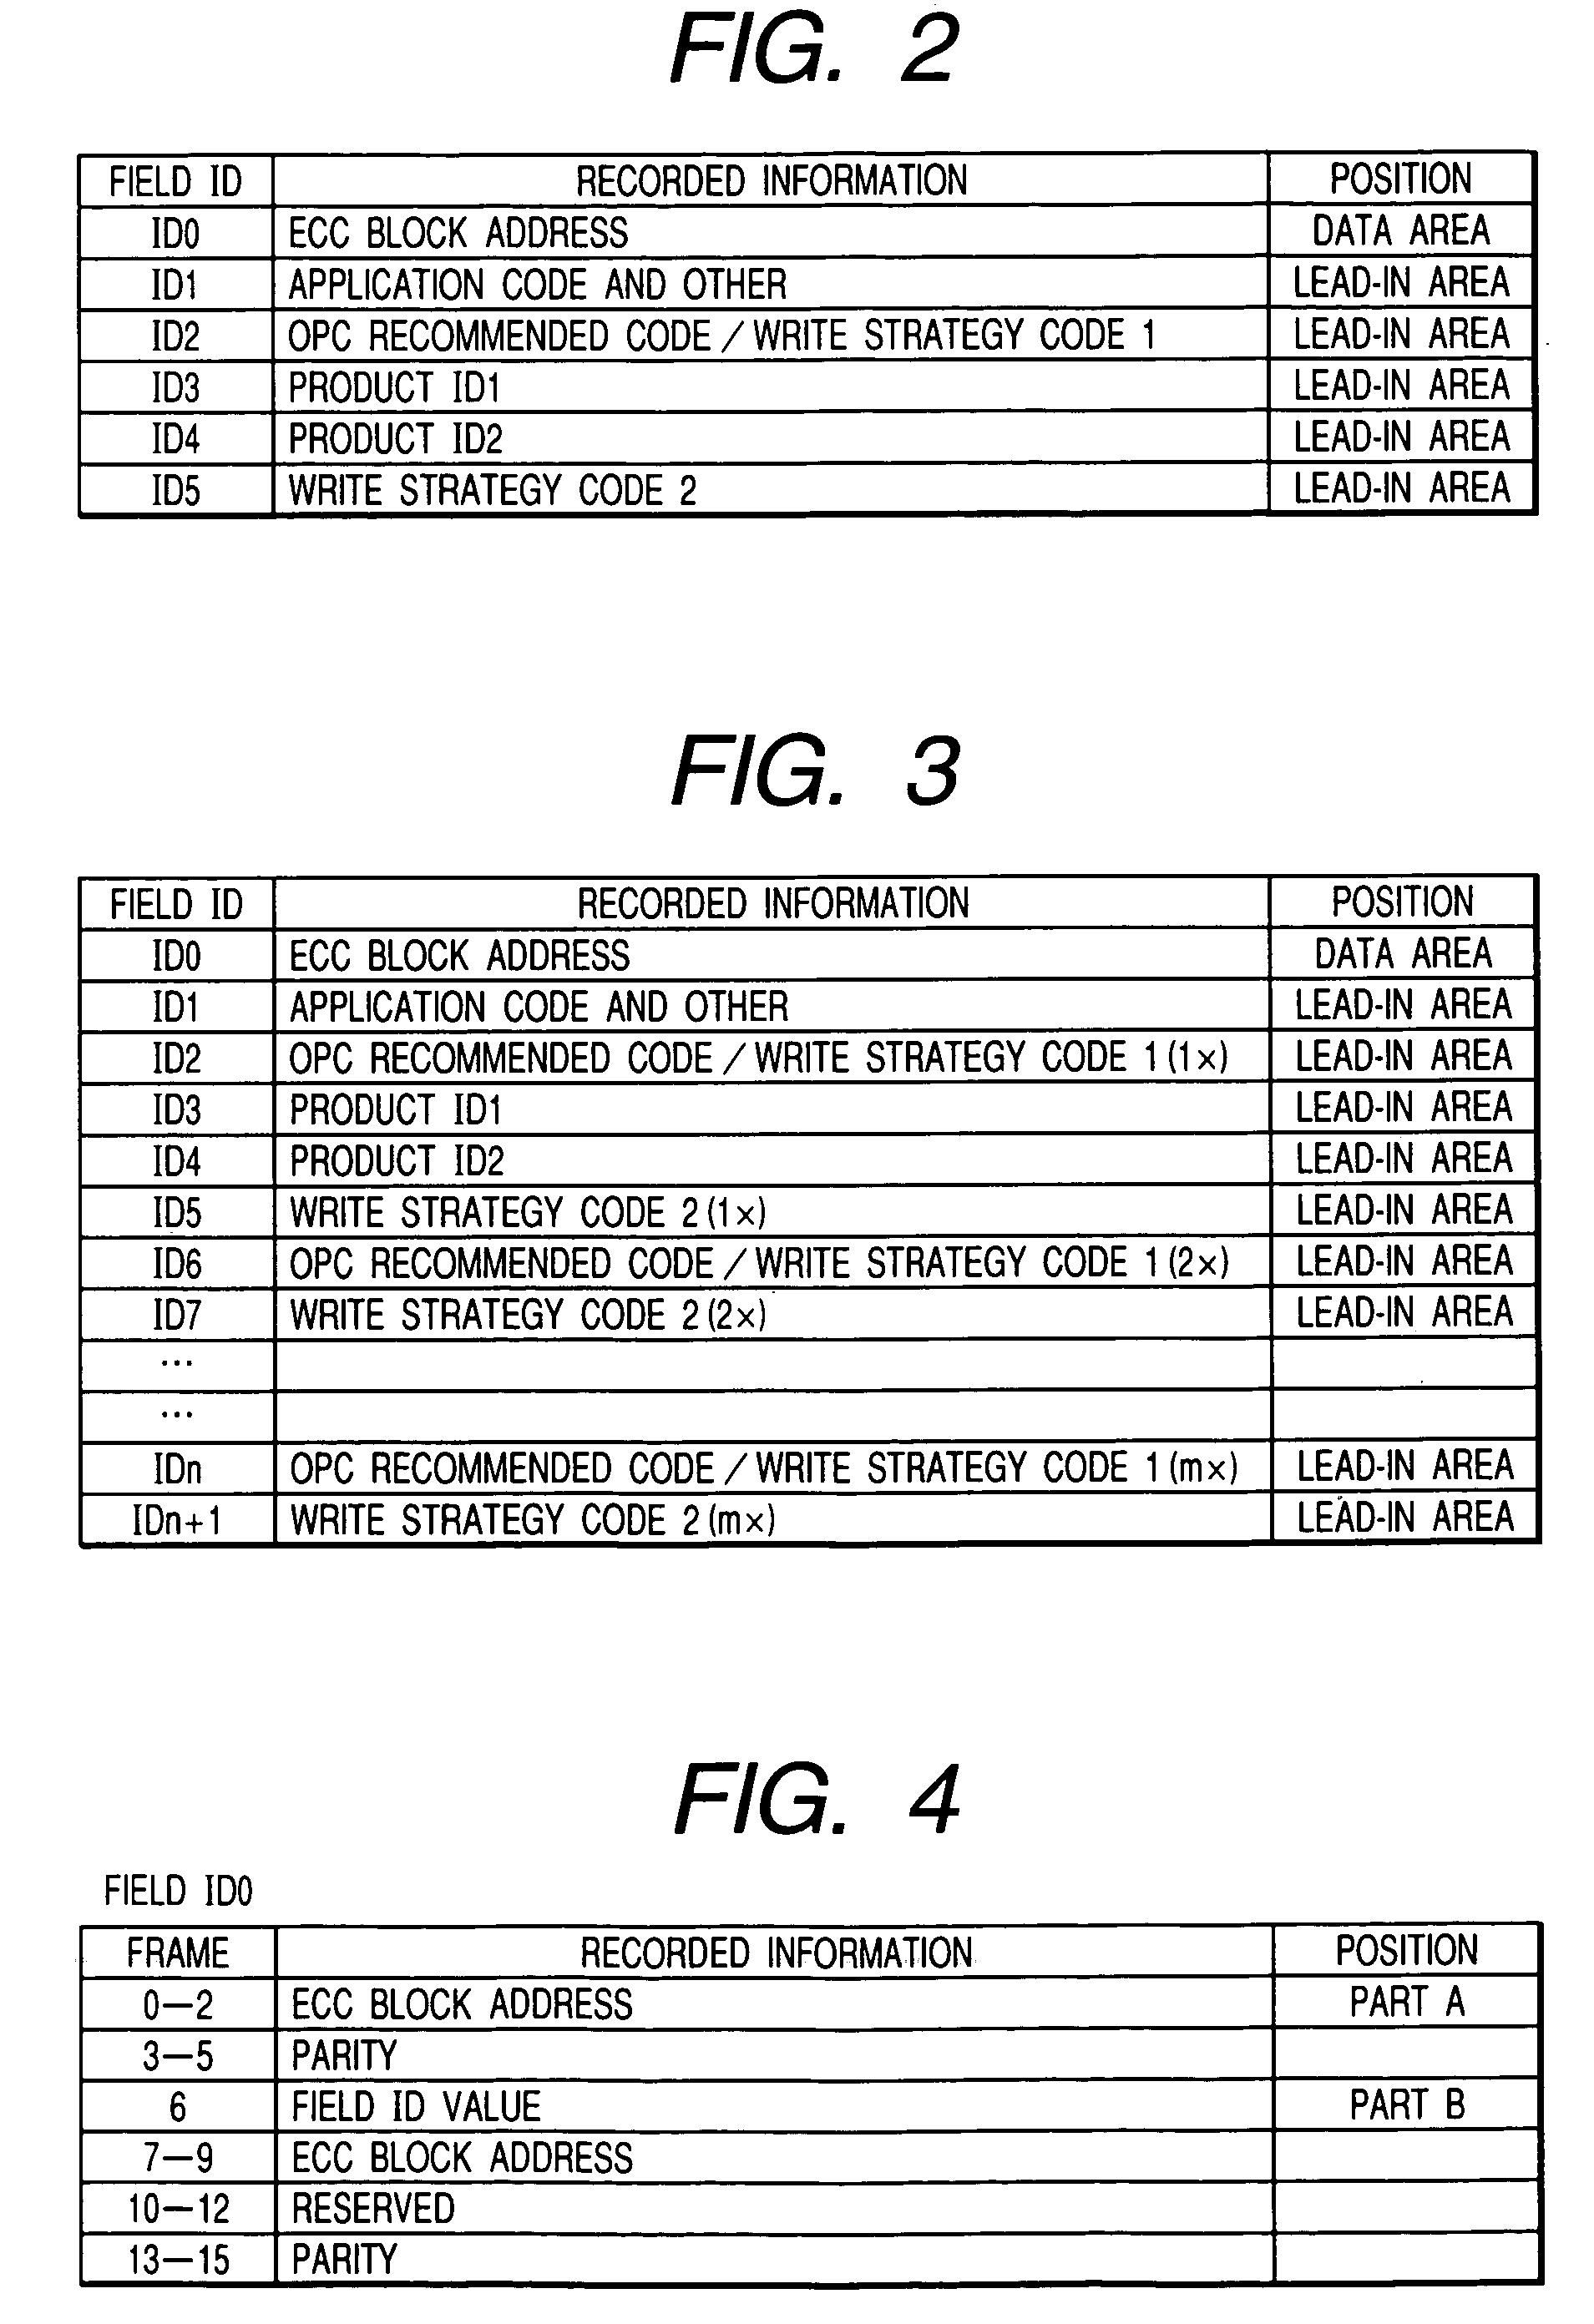 Optical disk adaptable to record at high disk scanning speed, and related apparatus and method